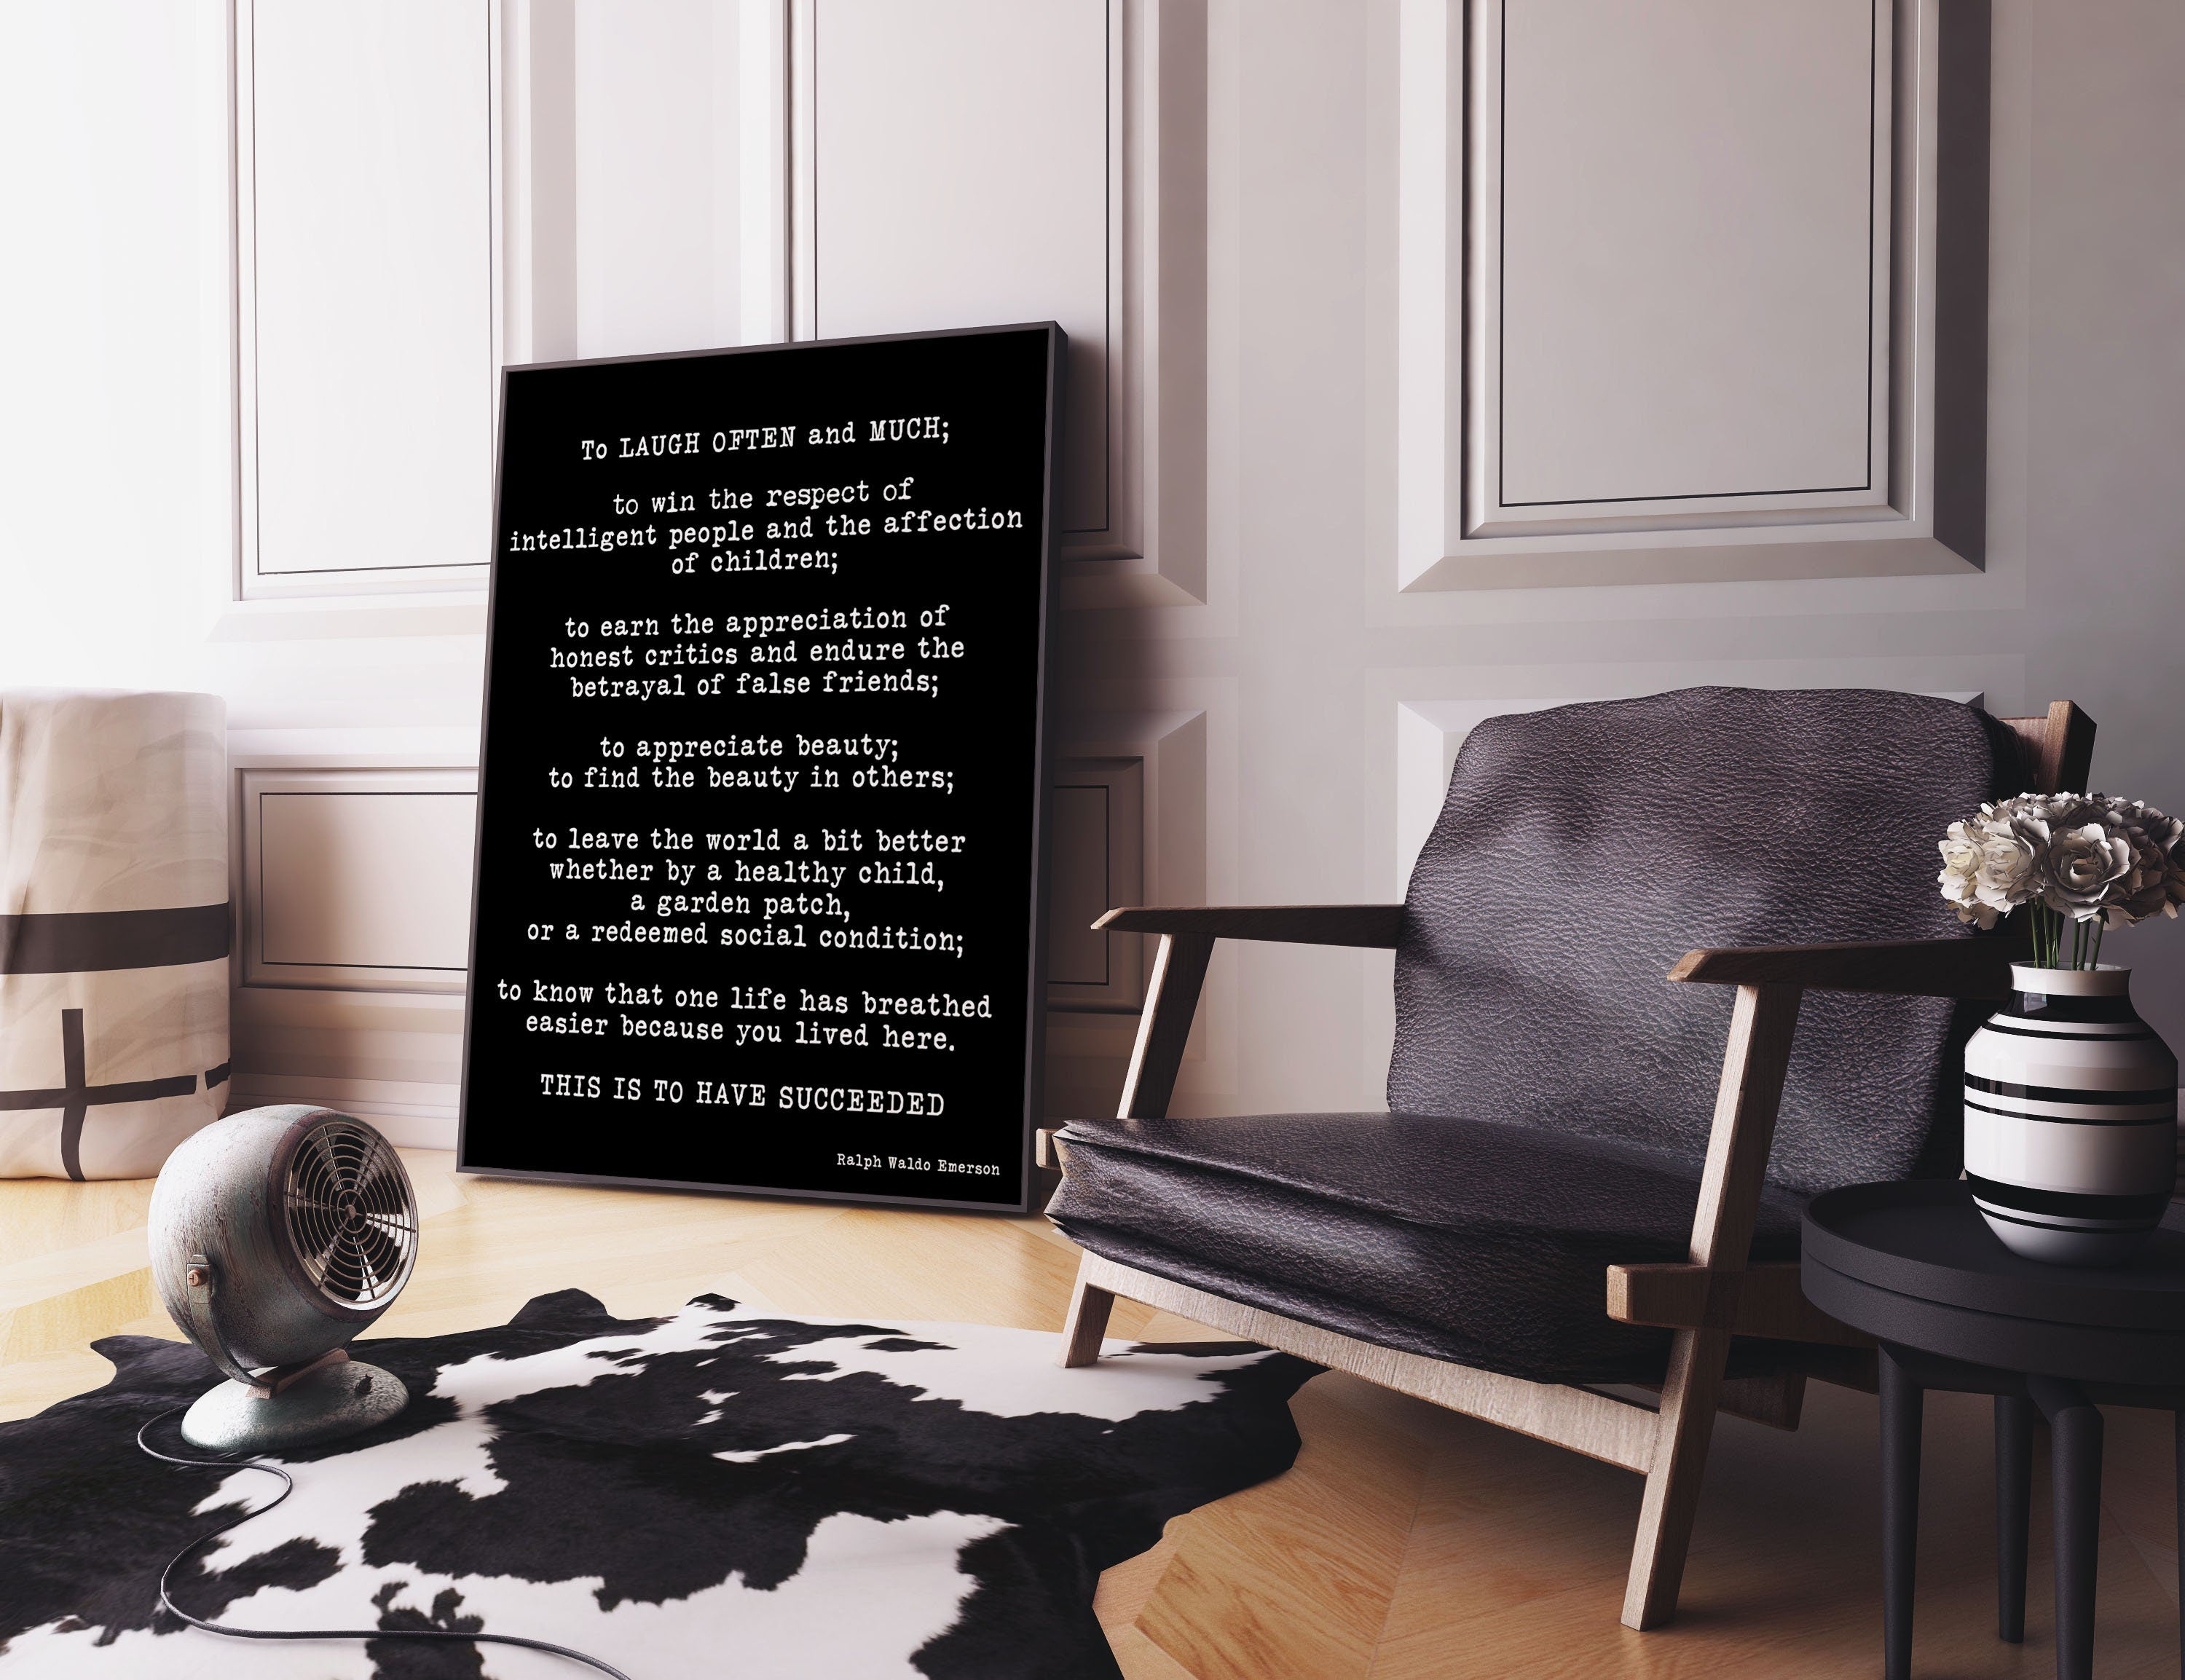 Ralph Waldo Emerson Framed Art -Inspirational Quote Print Featuring A Emerson Quote, Black & White Wall Art Quote Print